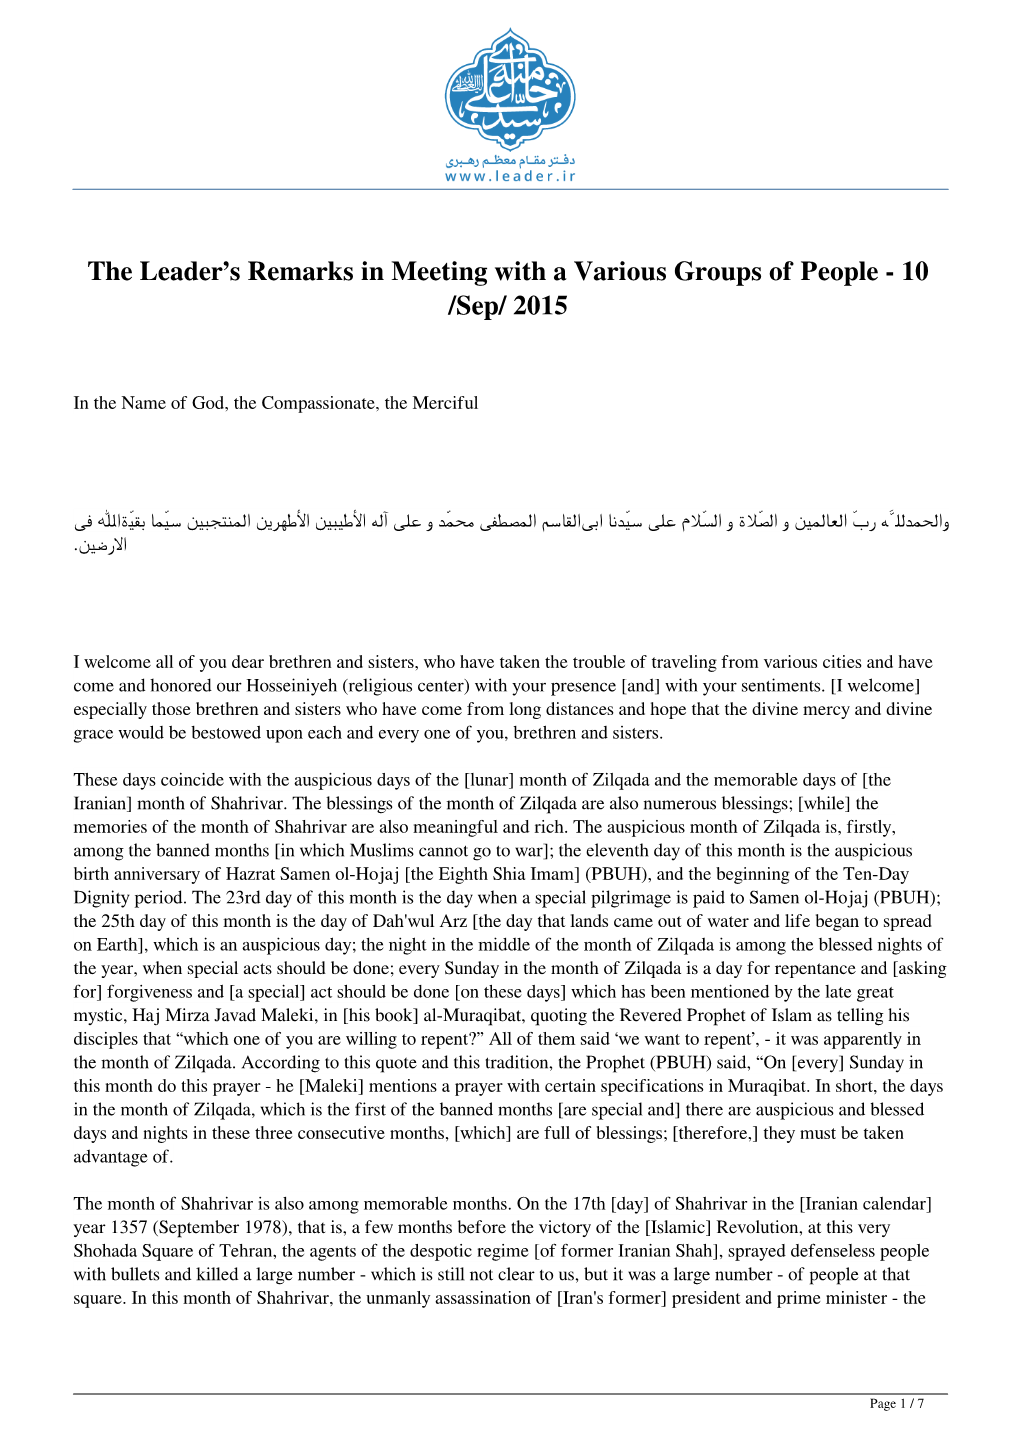 The Leader's Remarks in Meeting with a Various Groups